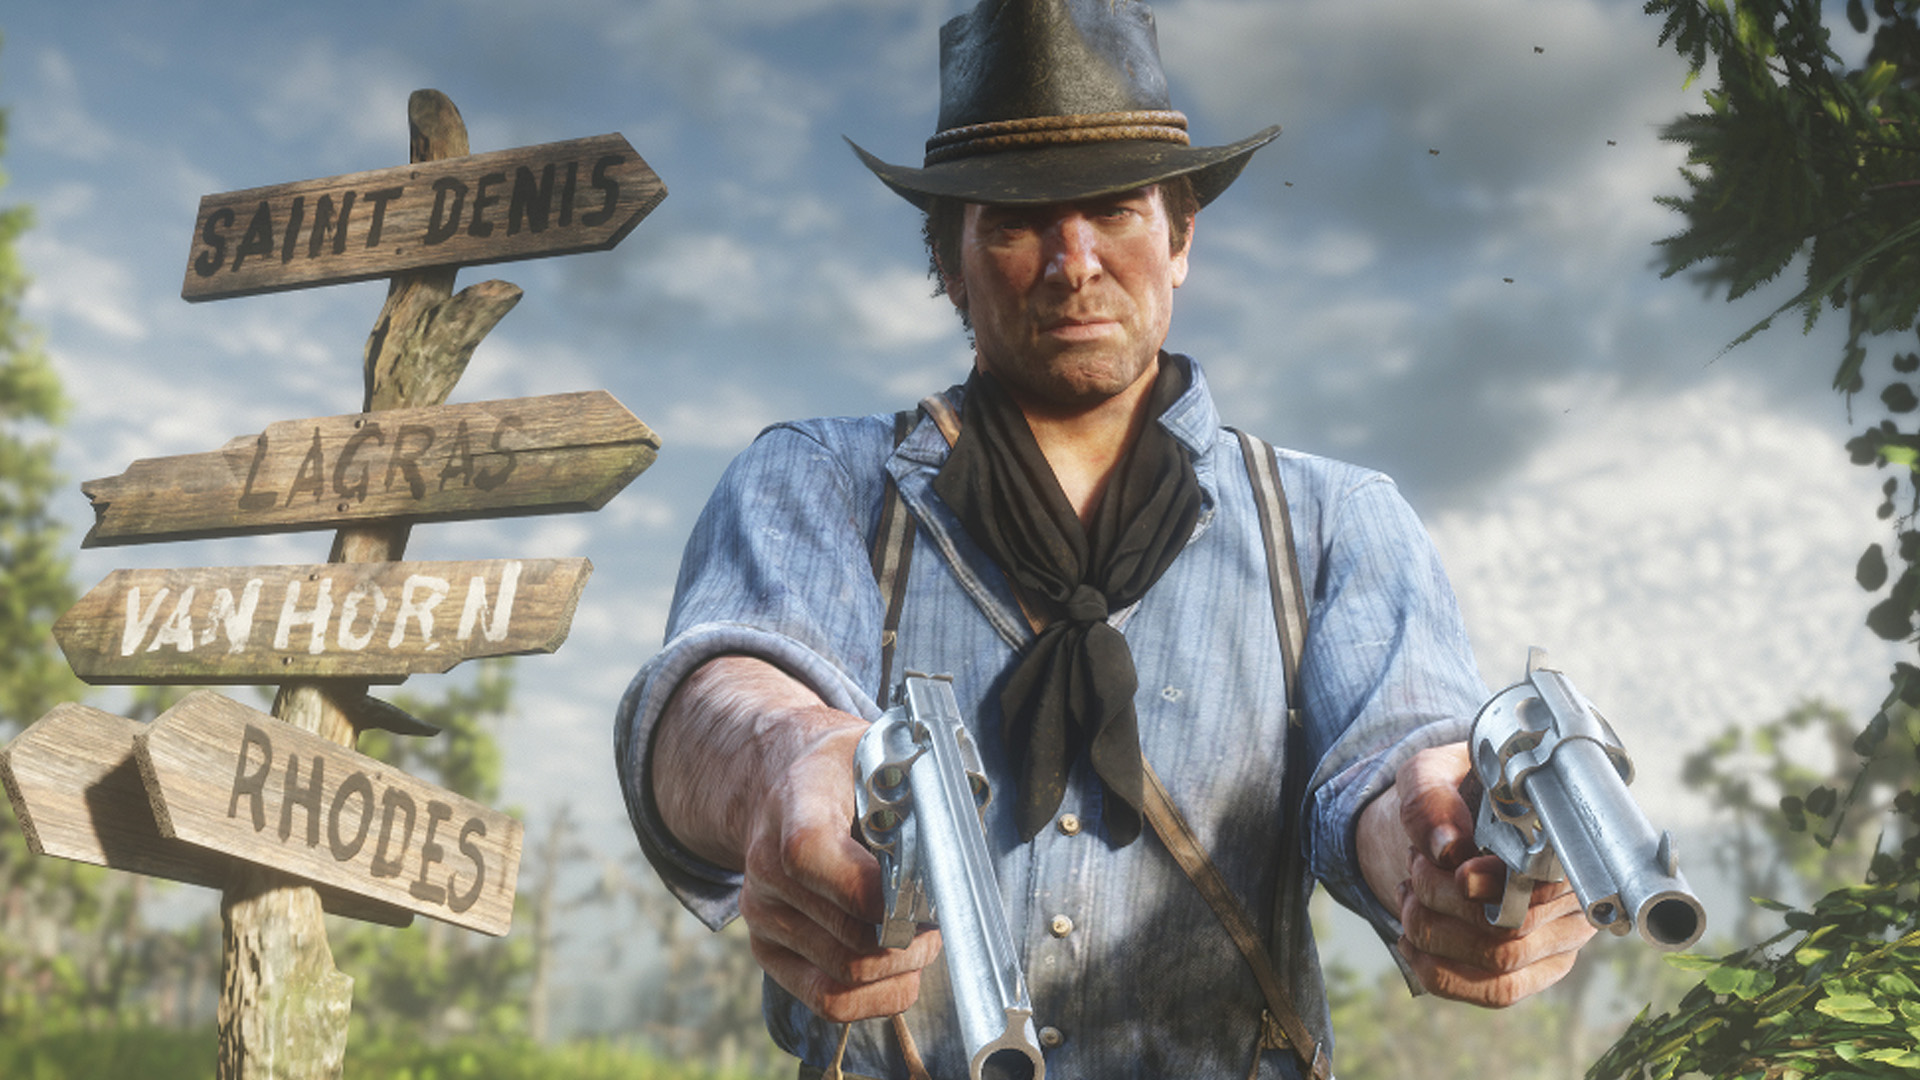 An image of Arthur Morgan, the main character from Red Dead Redemption 2, holding out two guns.